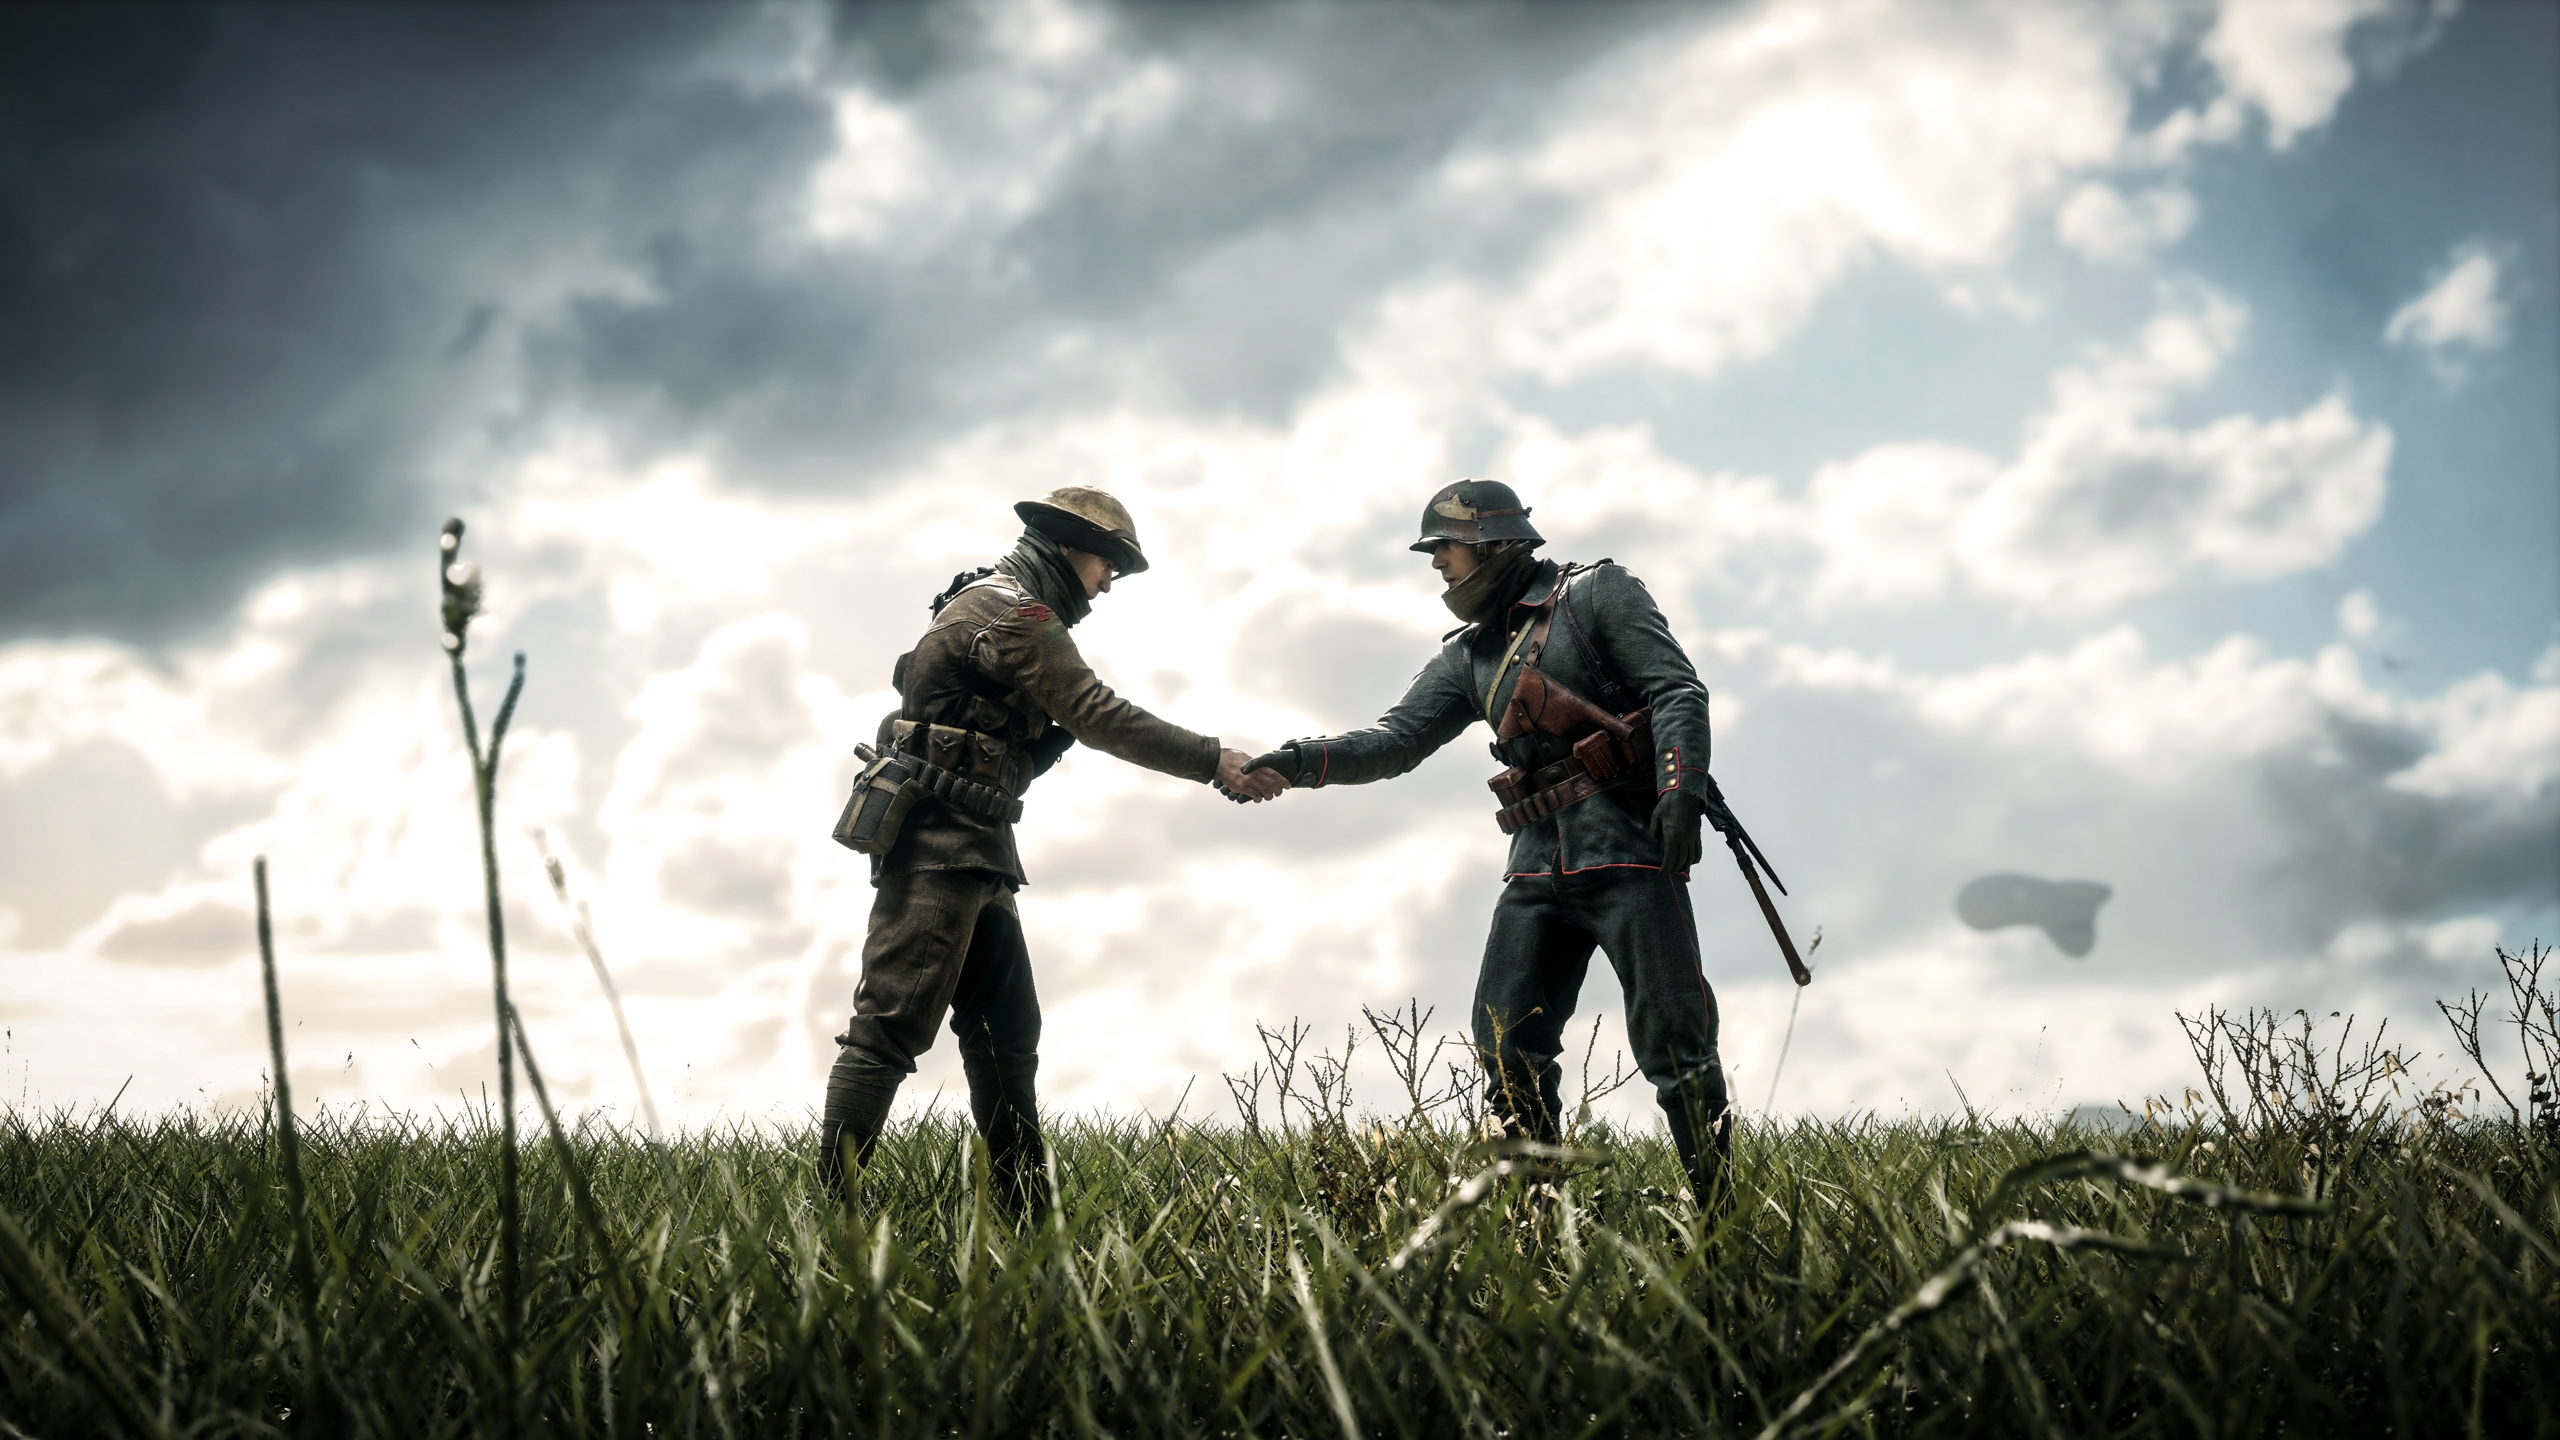 battlefield 1 wallpaper 4k,people in nature,friendship,soldier,grass family,photography